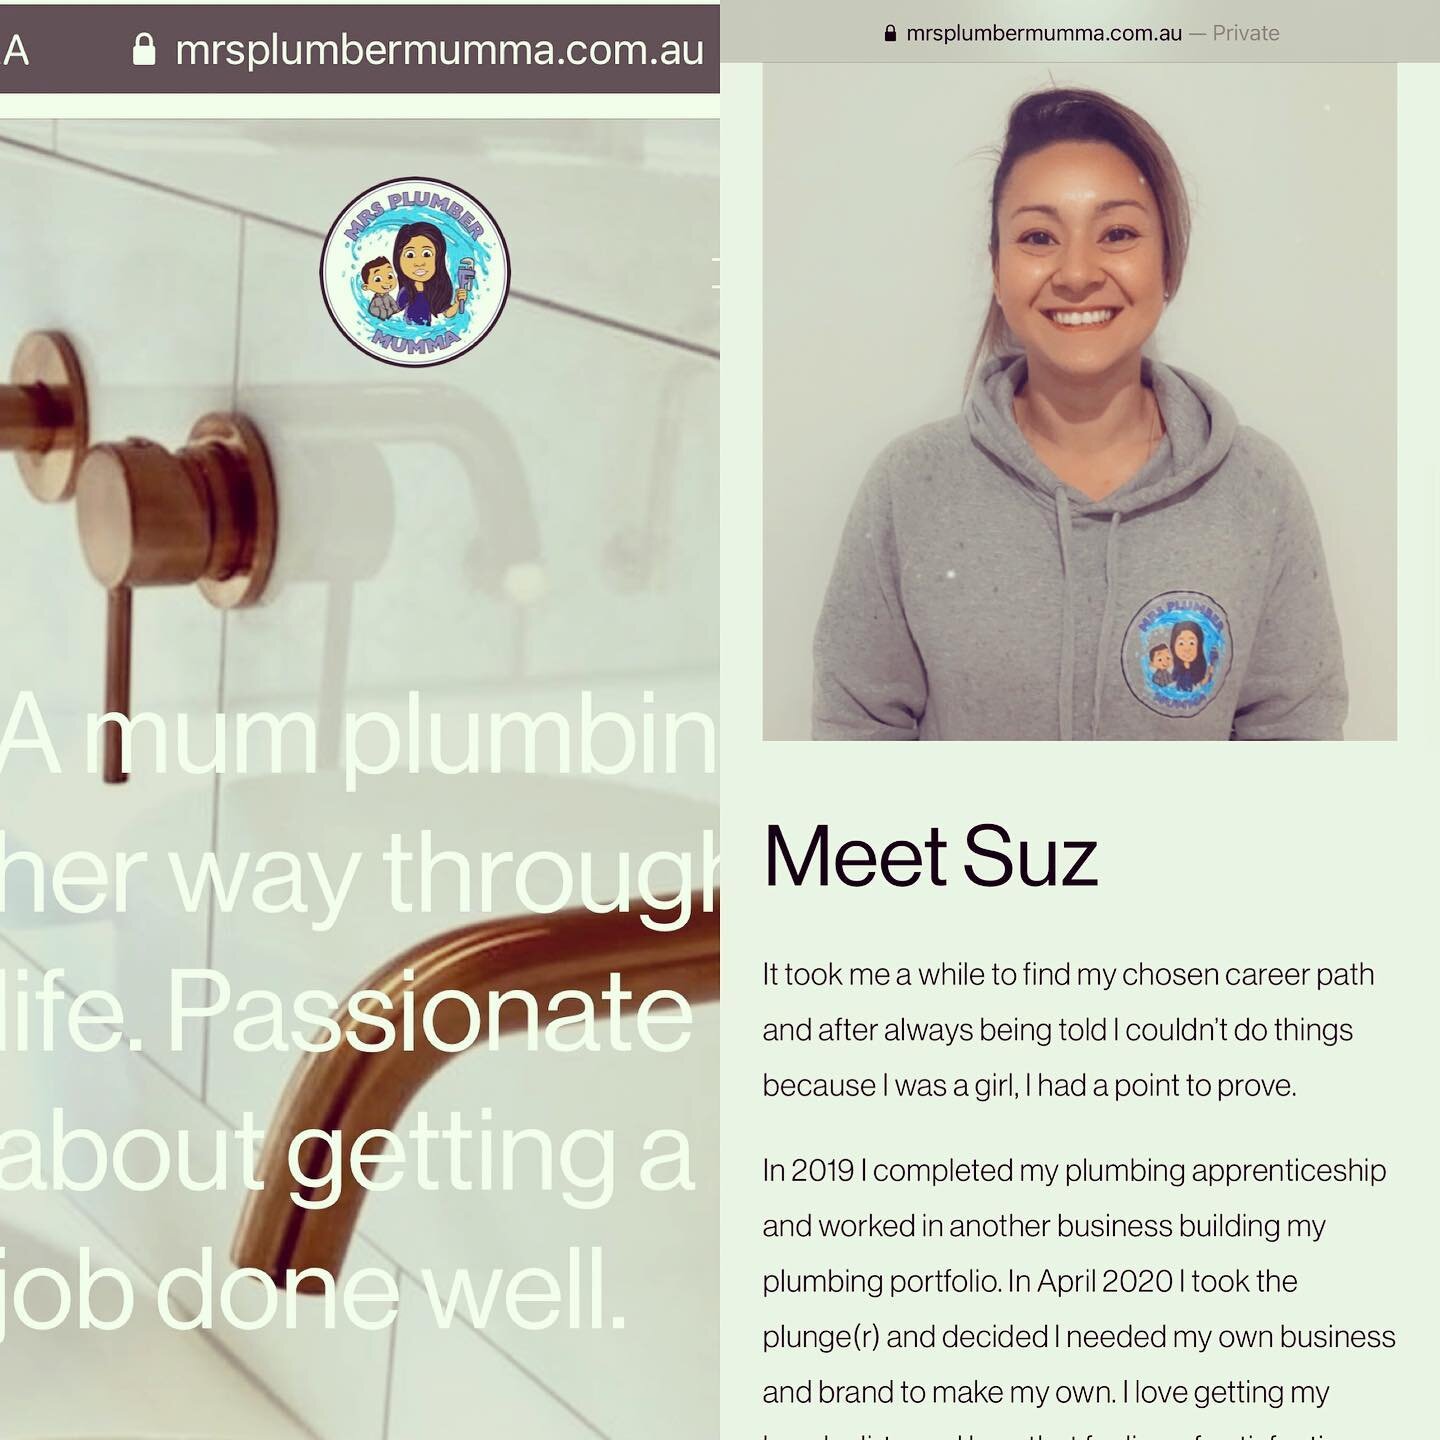 ❗️Website Alert❗️

Mrs Plumber Mumma now has an official website. 😁 

Check it out everyone. 

Massive shout out to Dana Lunn from https://danalunn.com/ has done an absolute fantastic job. If anyone is needing a website made up. Contact Dana. 

Than